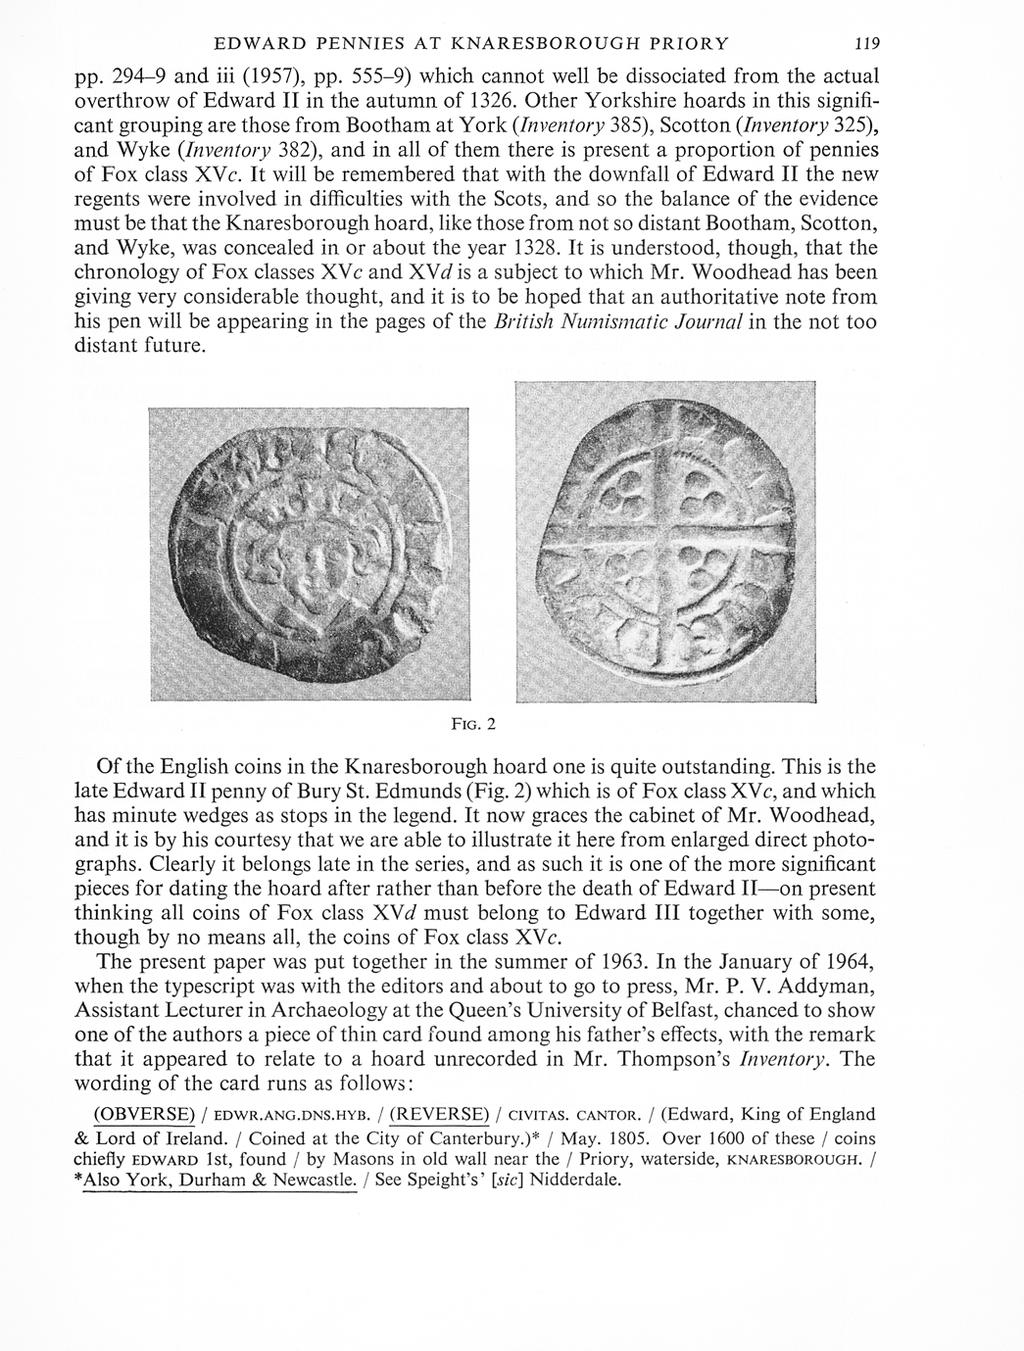 EDWARD PENNIES AT KNARESBOROUGH PRIORY 119 pp. 294-9 and iii (1957), pp. 555-9) which cannot well be dissociated from the actual overthrow of Edward II in the autumn of 1326.